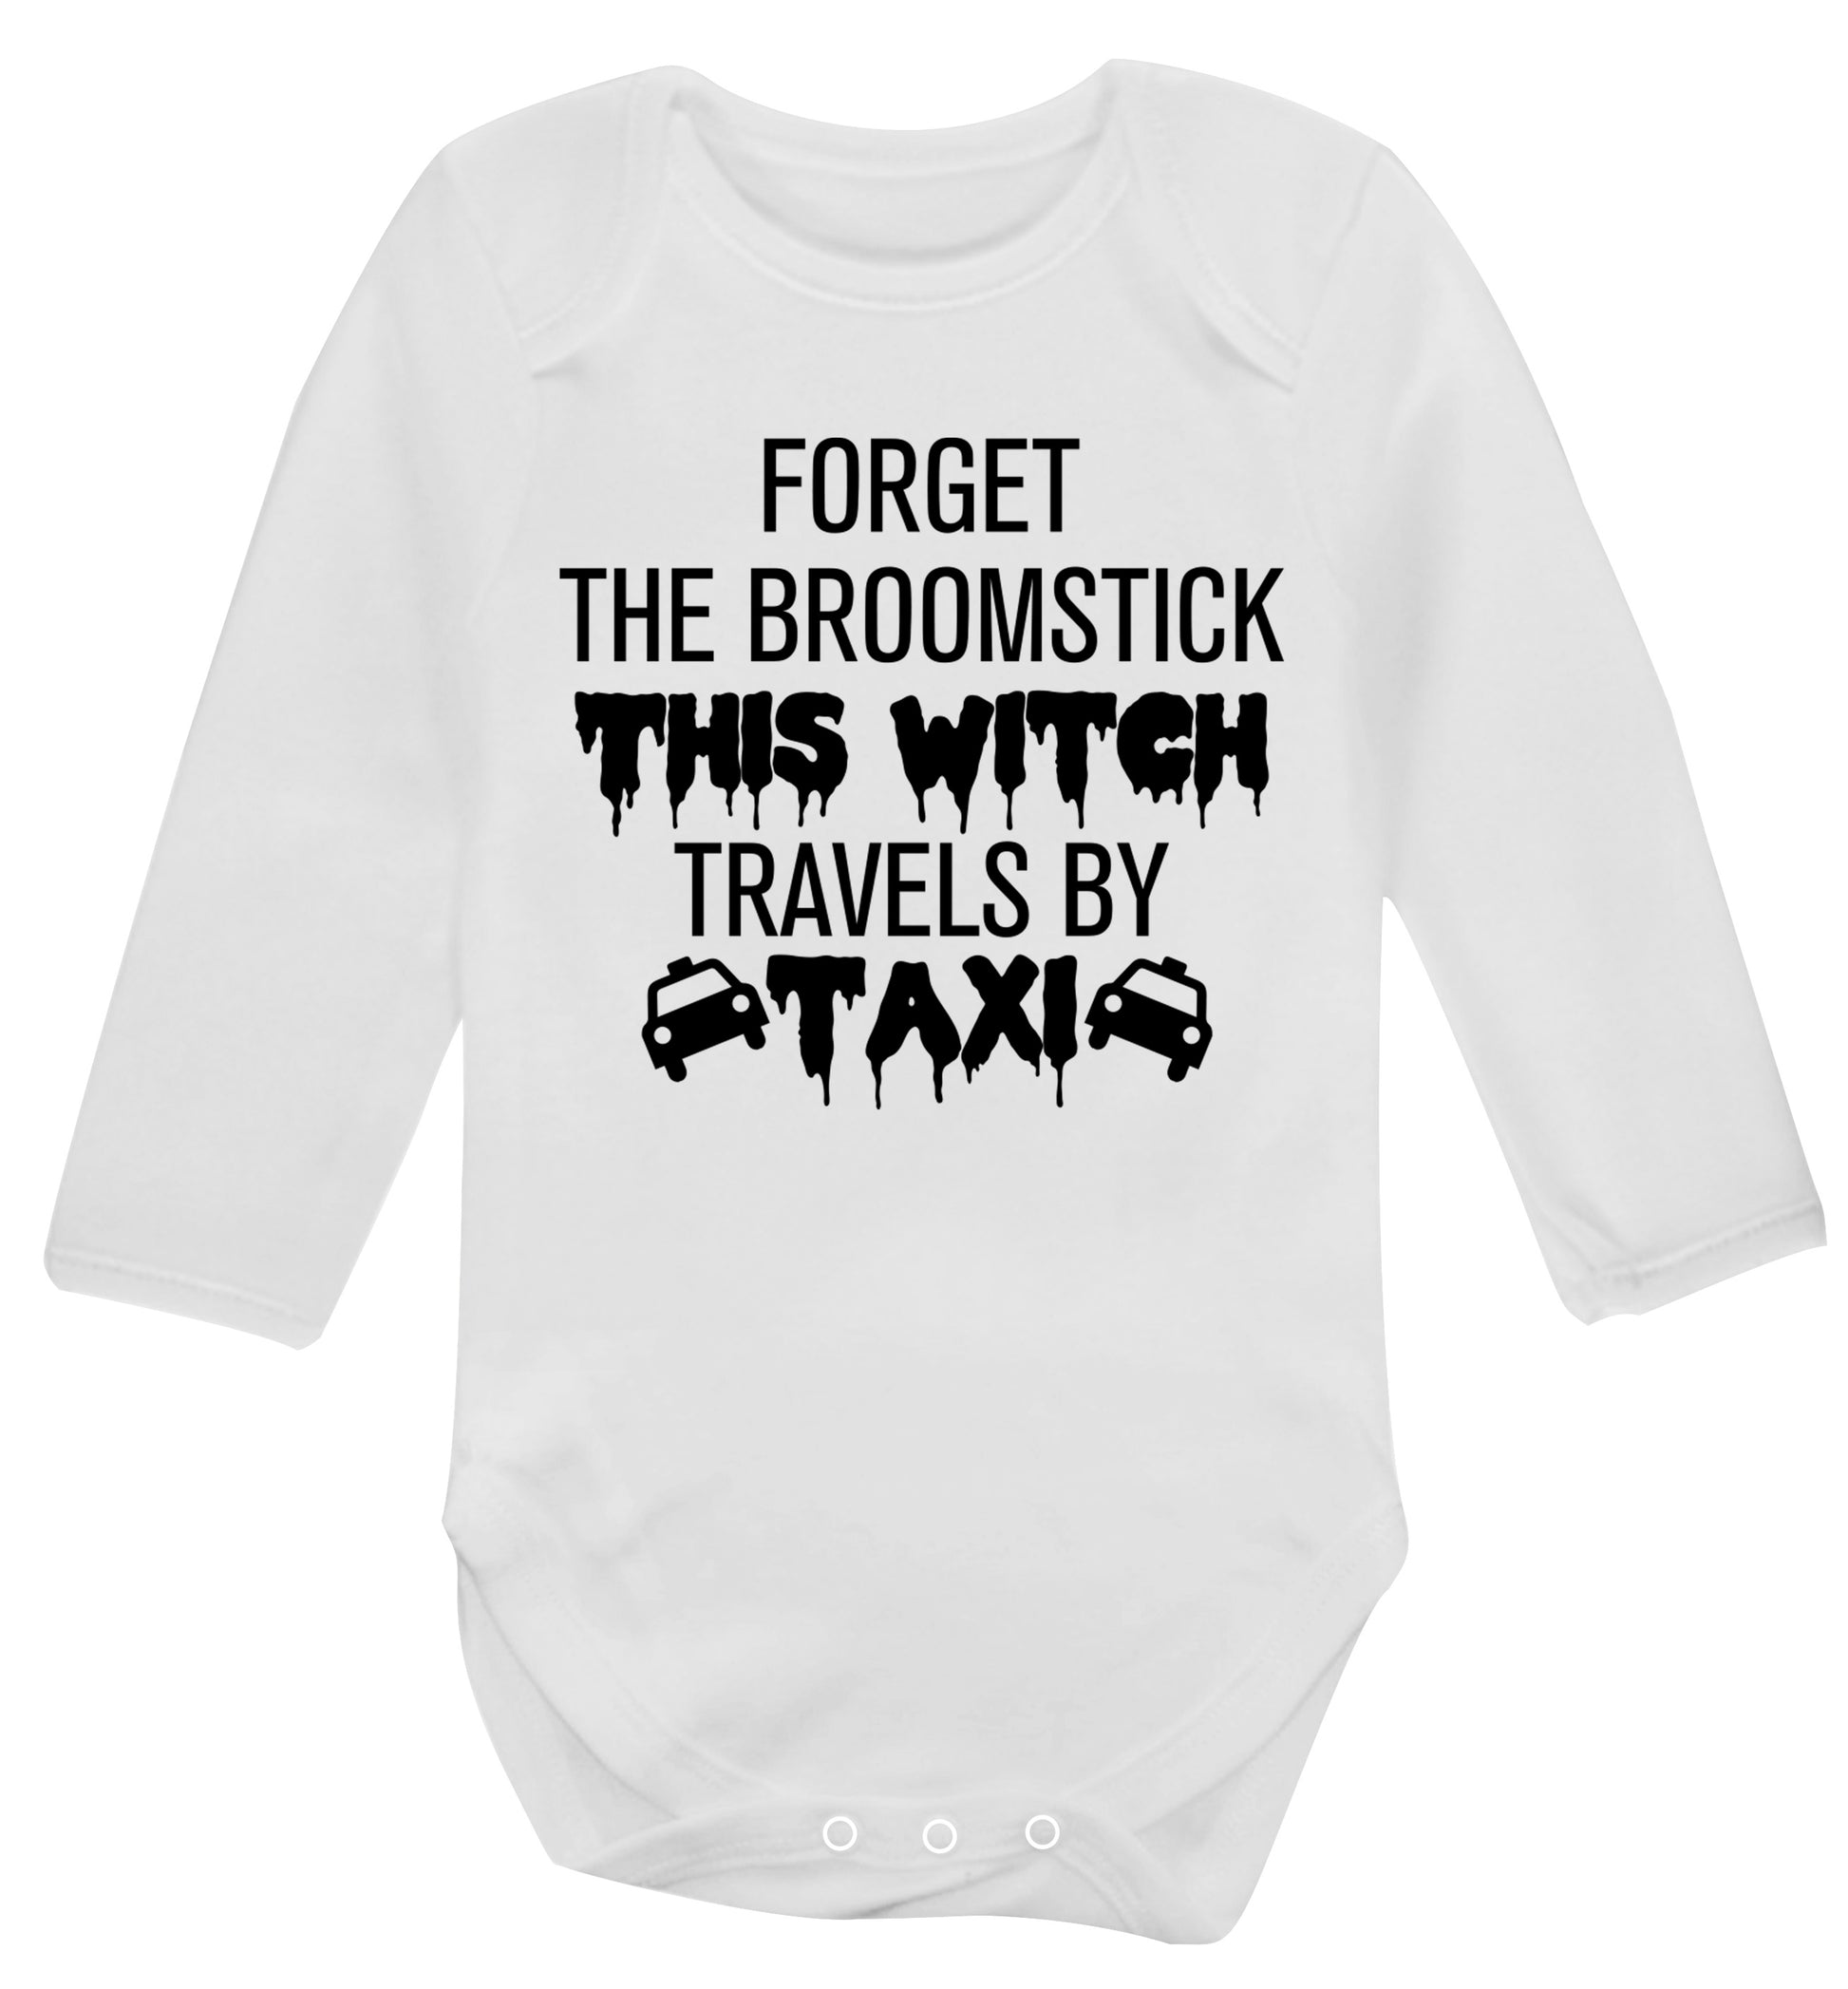 Forget the broomstick this witch travels by taxi Baby Vest long sleeved white 6-12 months